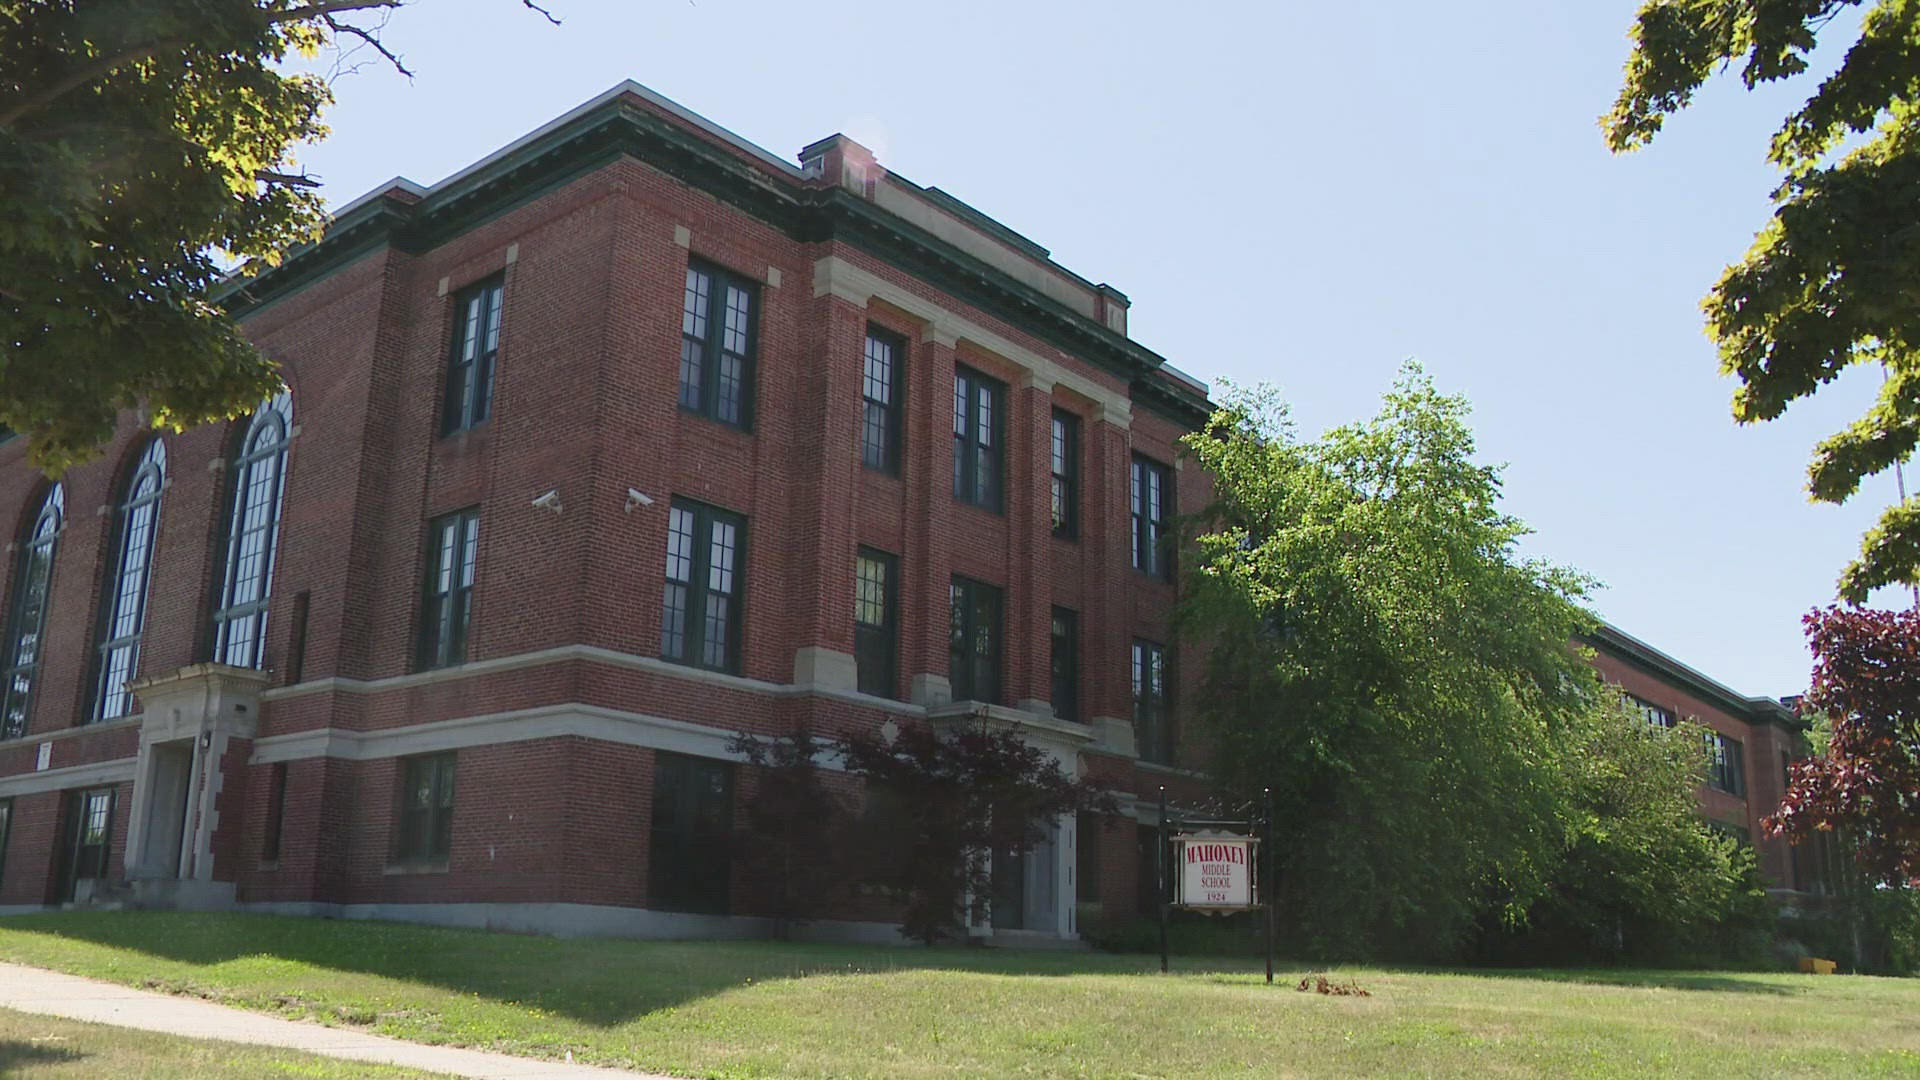 The Mahoney Middle School has been mostly vacant for about a year. Now there's a proposal seeking to use a portion of the space for people in need of shelter.